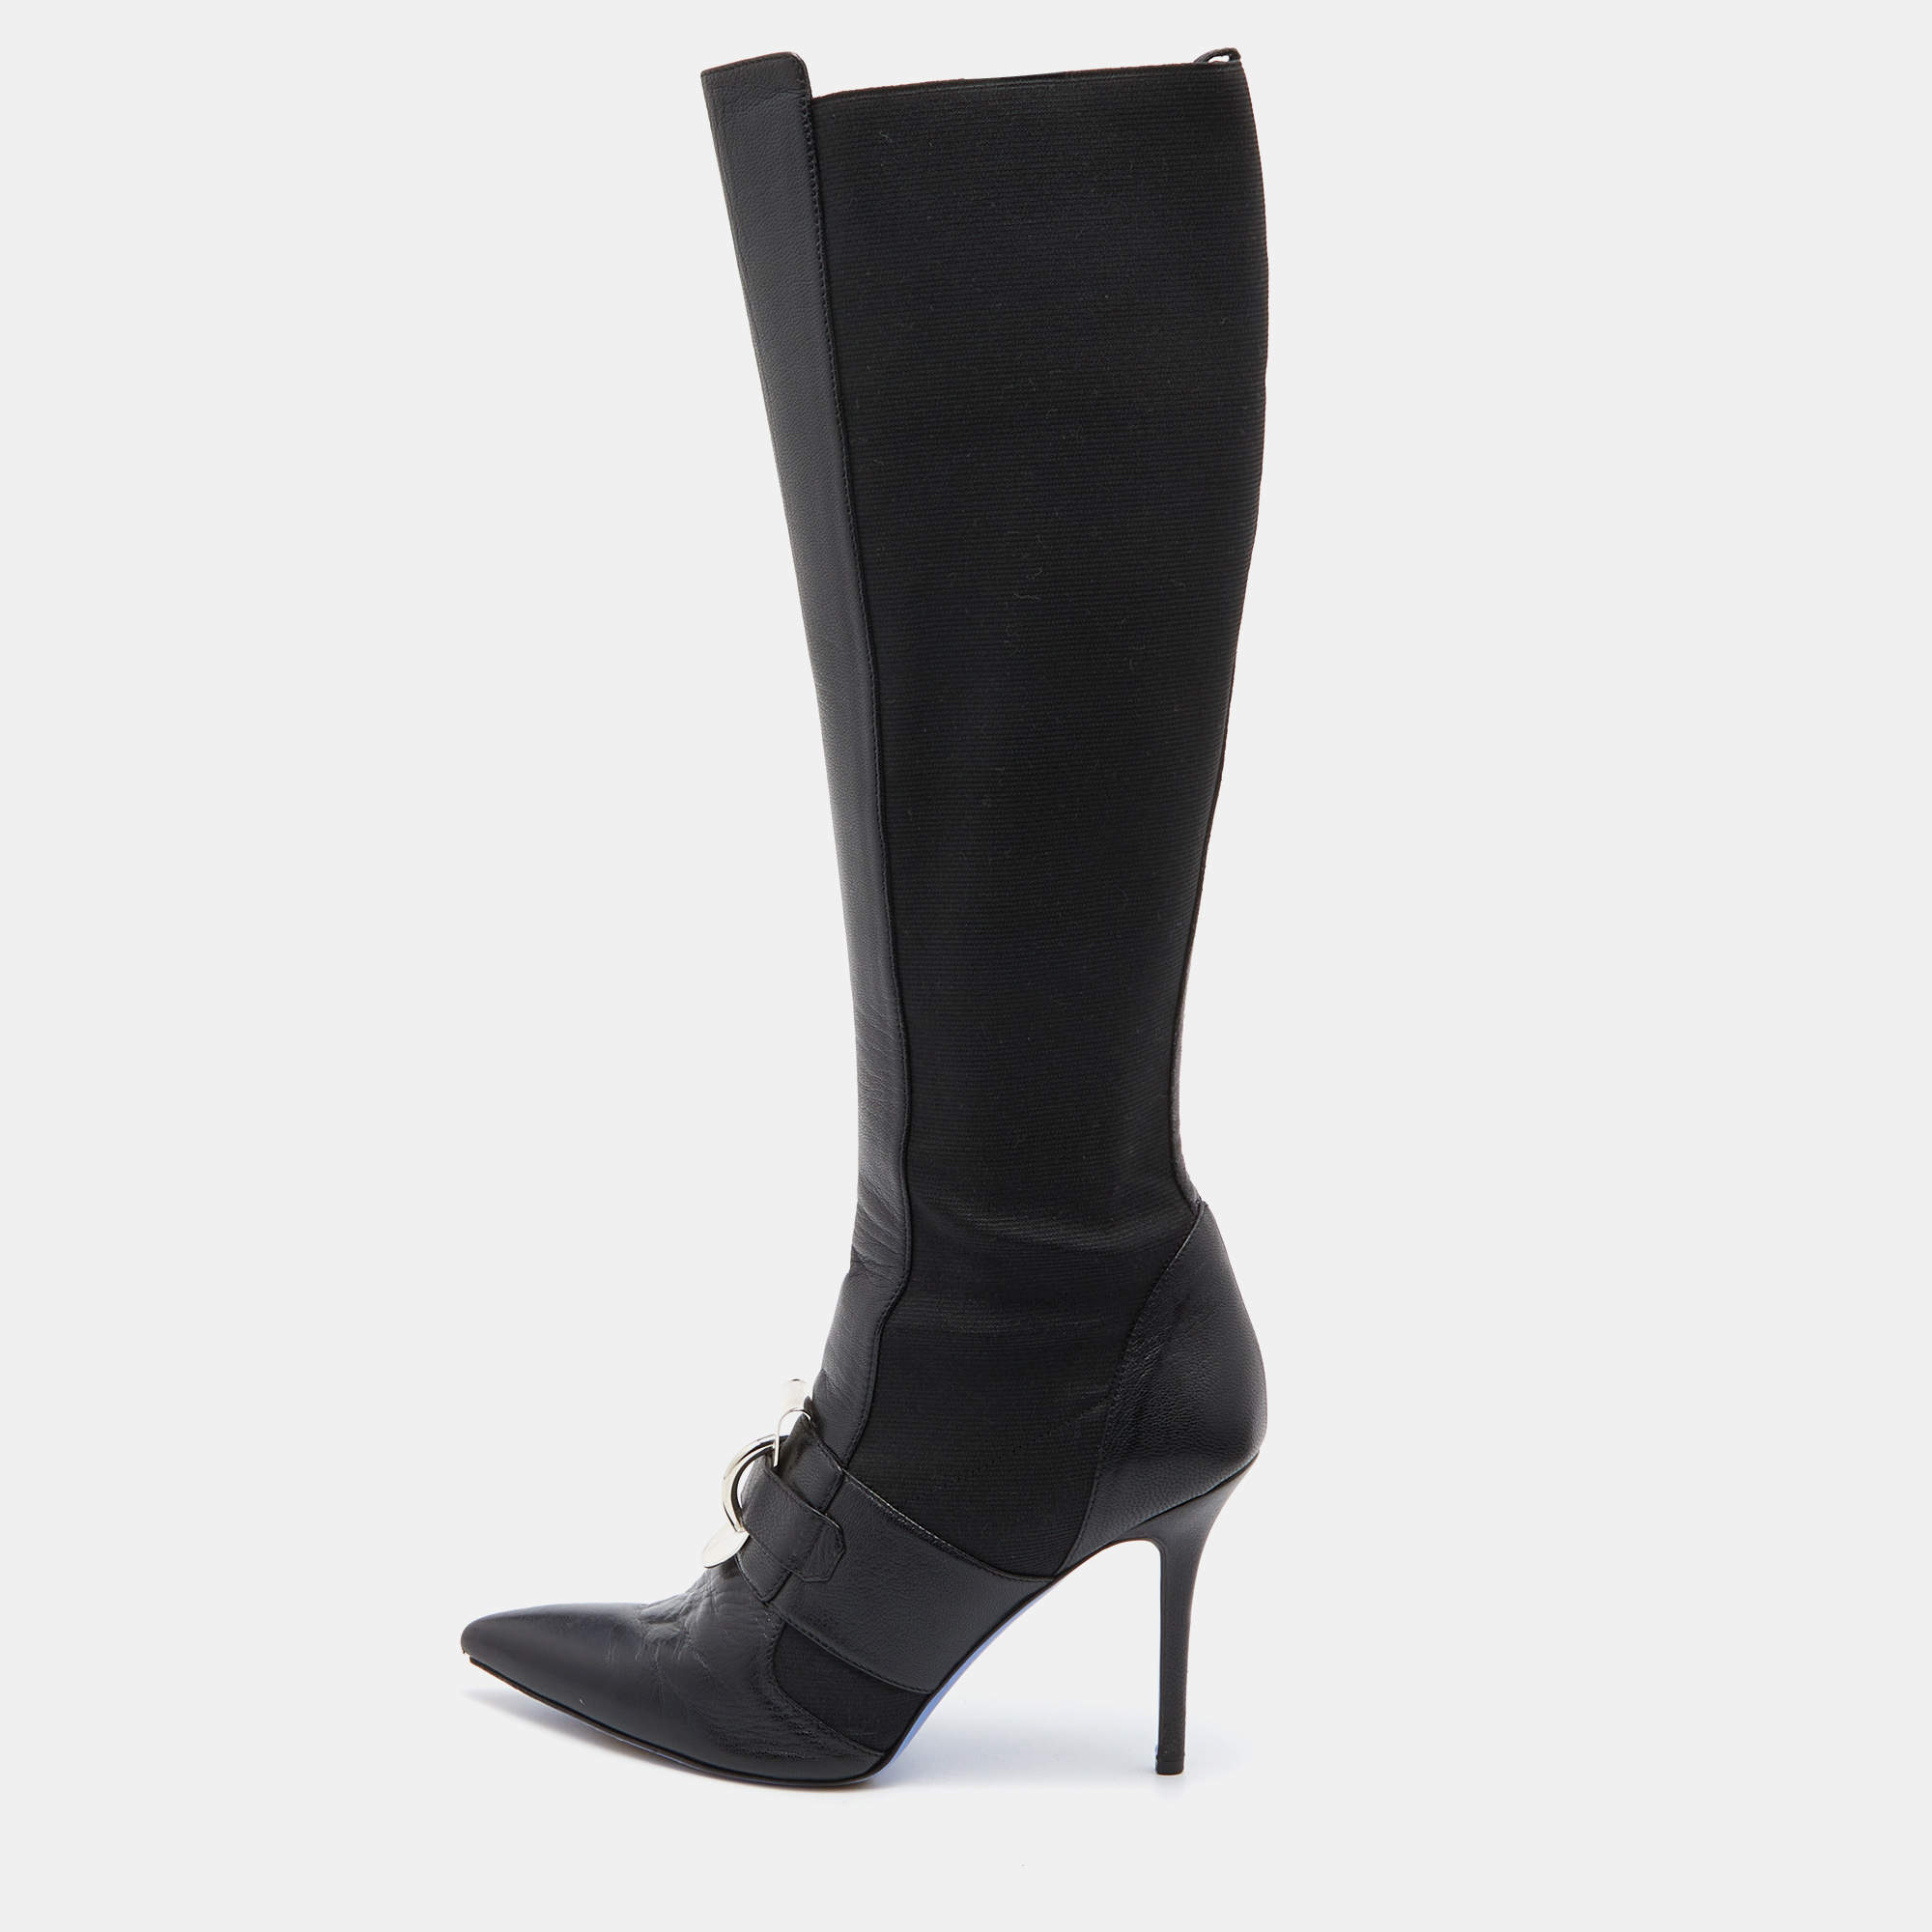 Versace Black Stretch Fabric and Leather Knee Length Boots Size 41